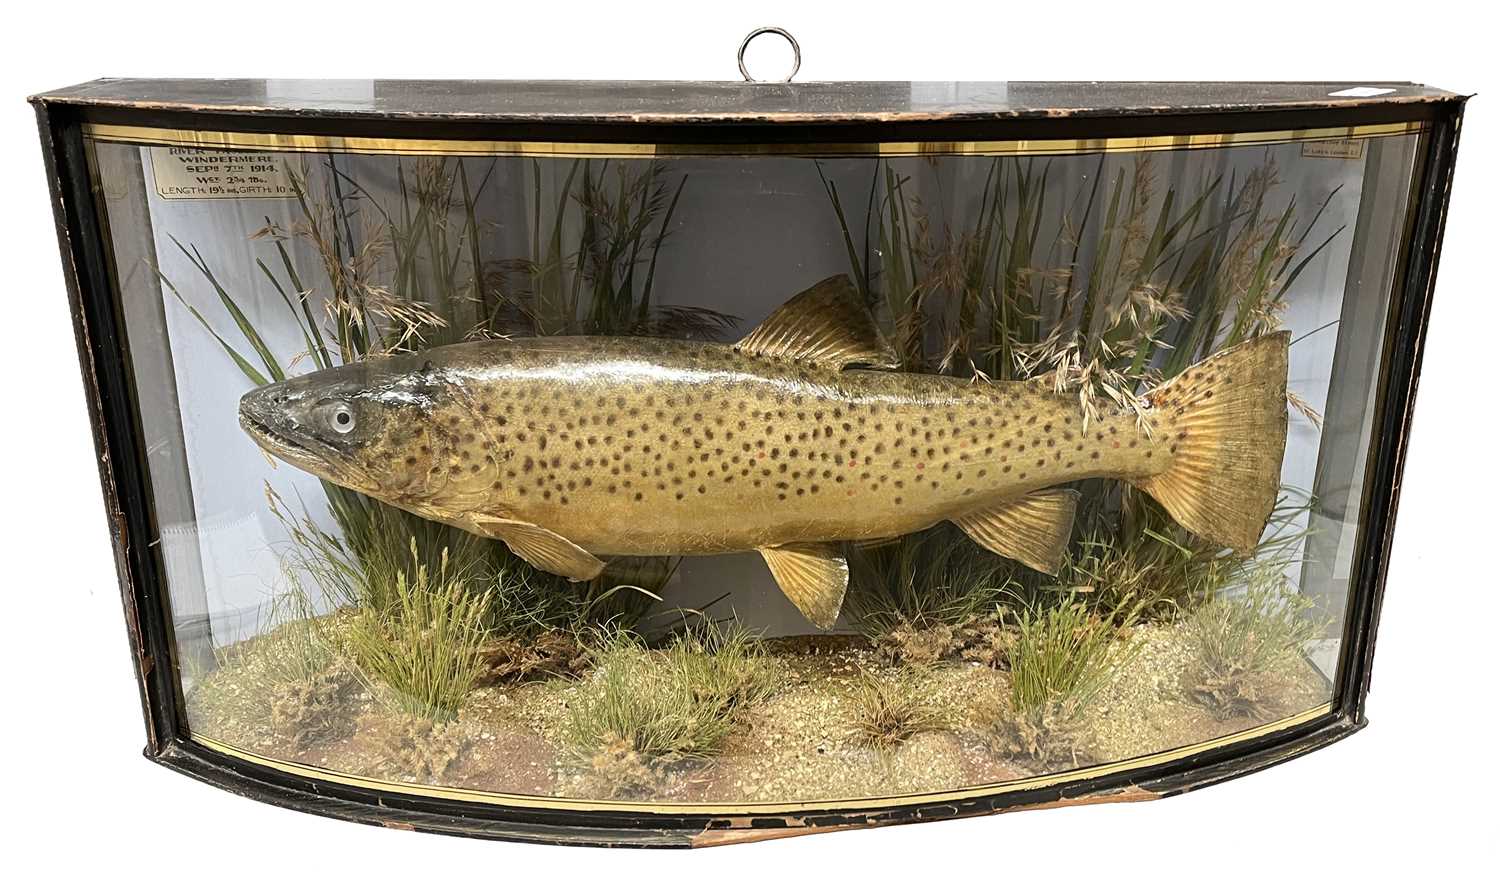 Taxidermy cased Trout in naturalistic setting caught by O Wilkinson in River Troutbeck, Lake